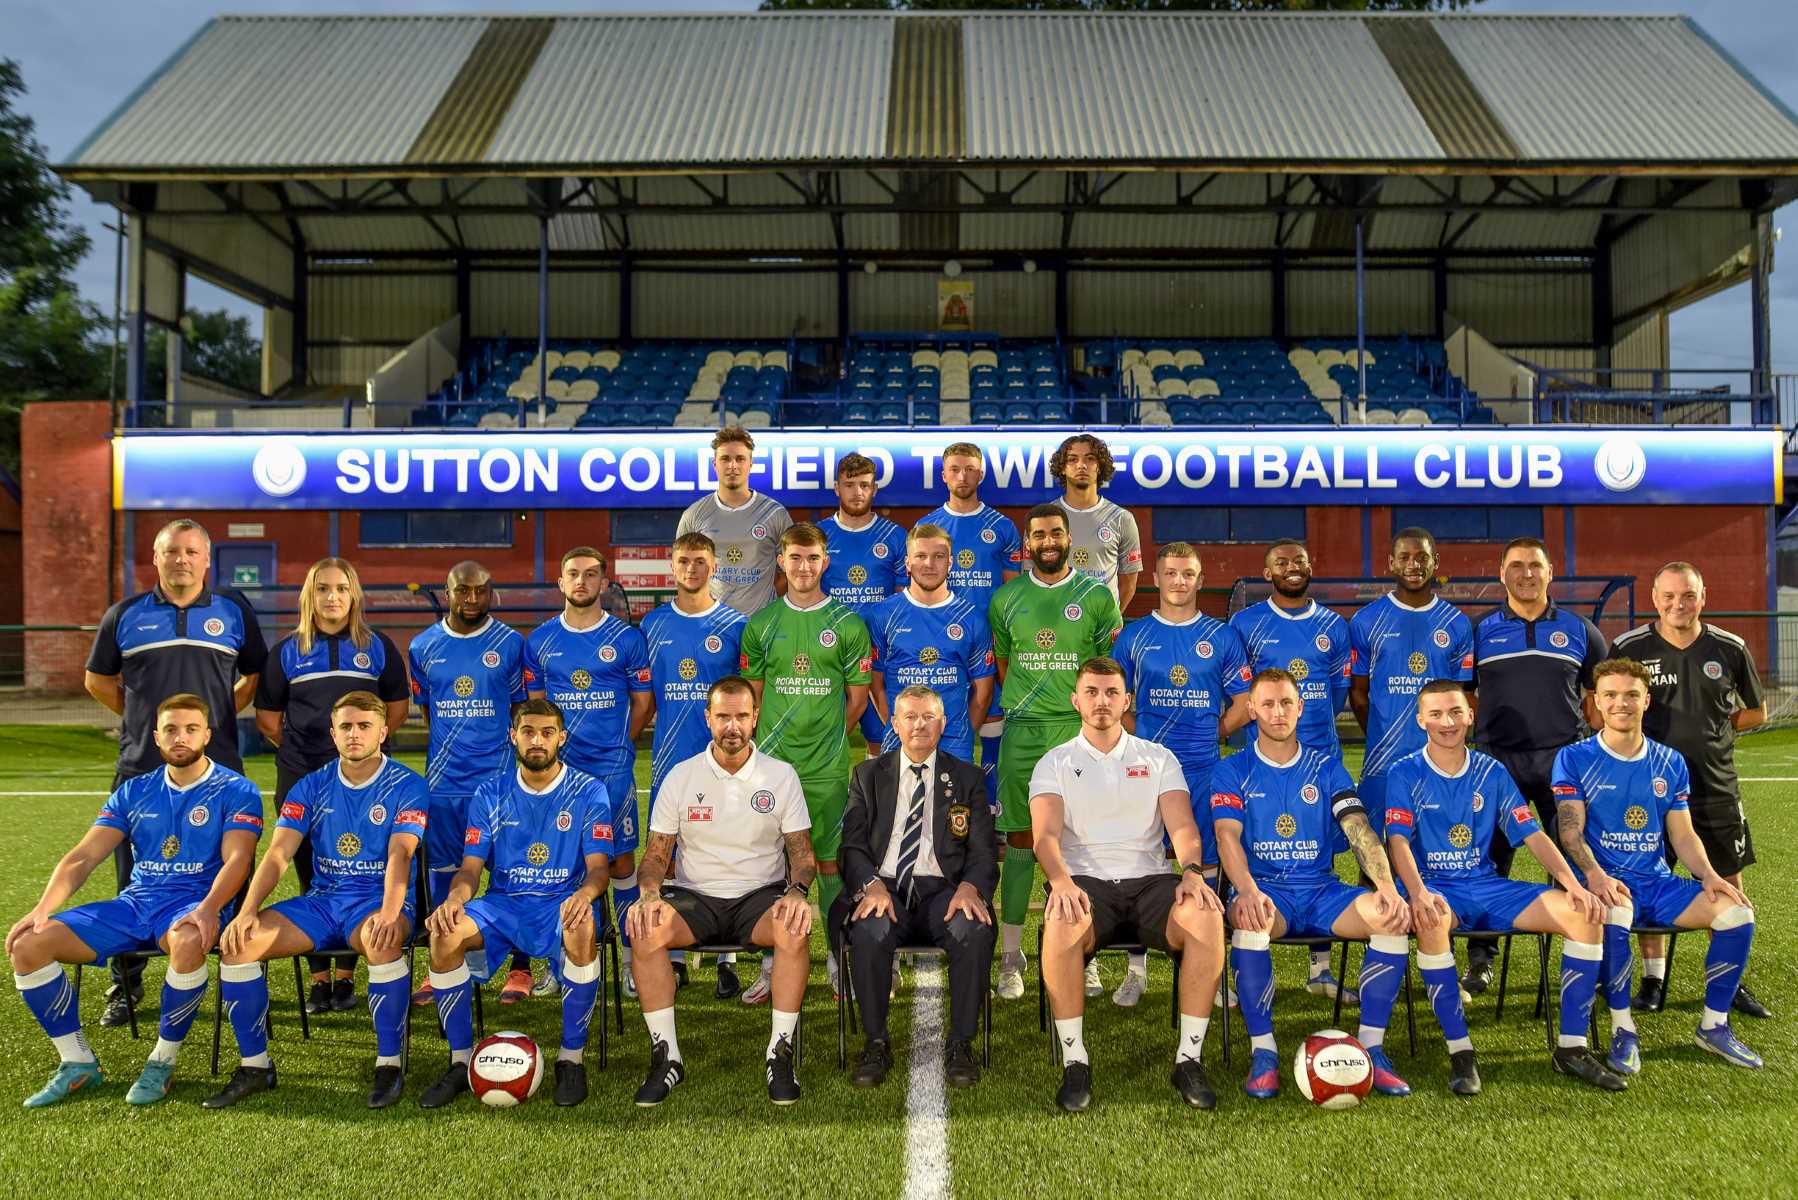 sutton-coldfield-town-fc-18-football-club-facts